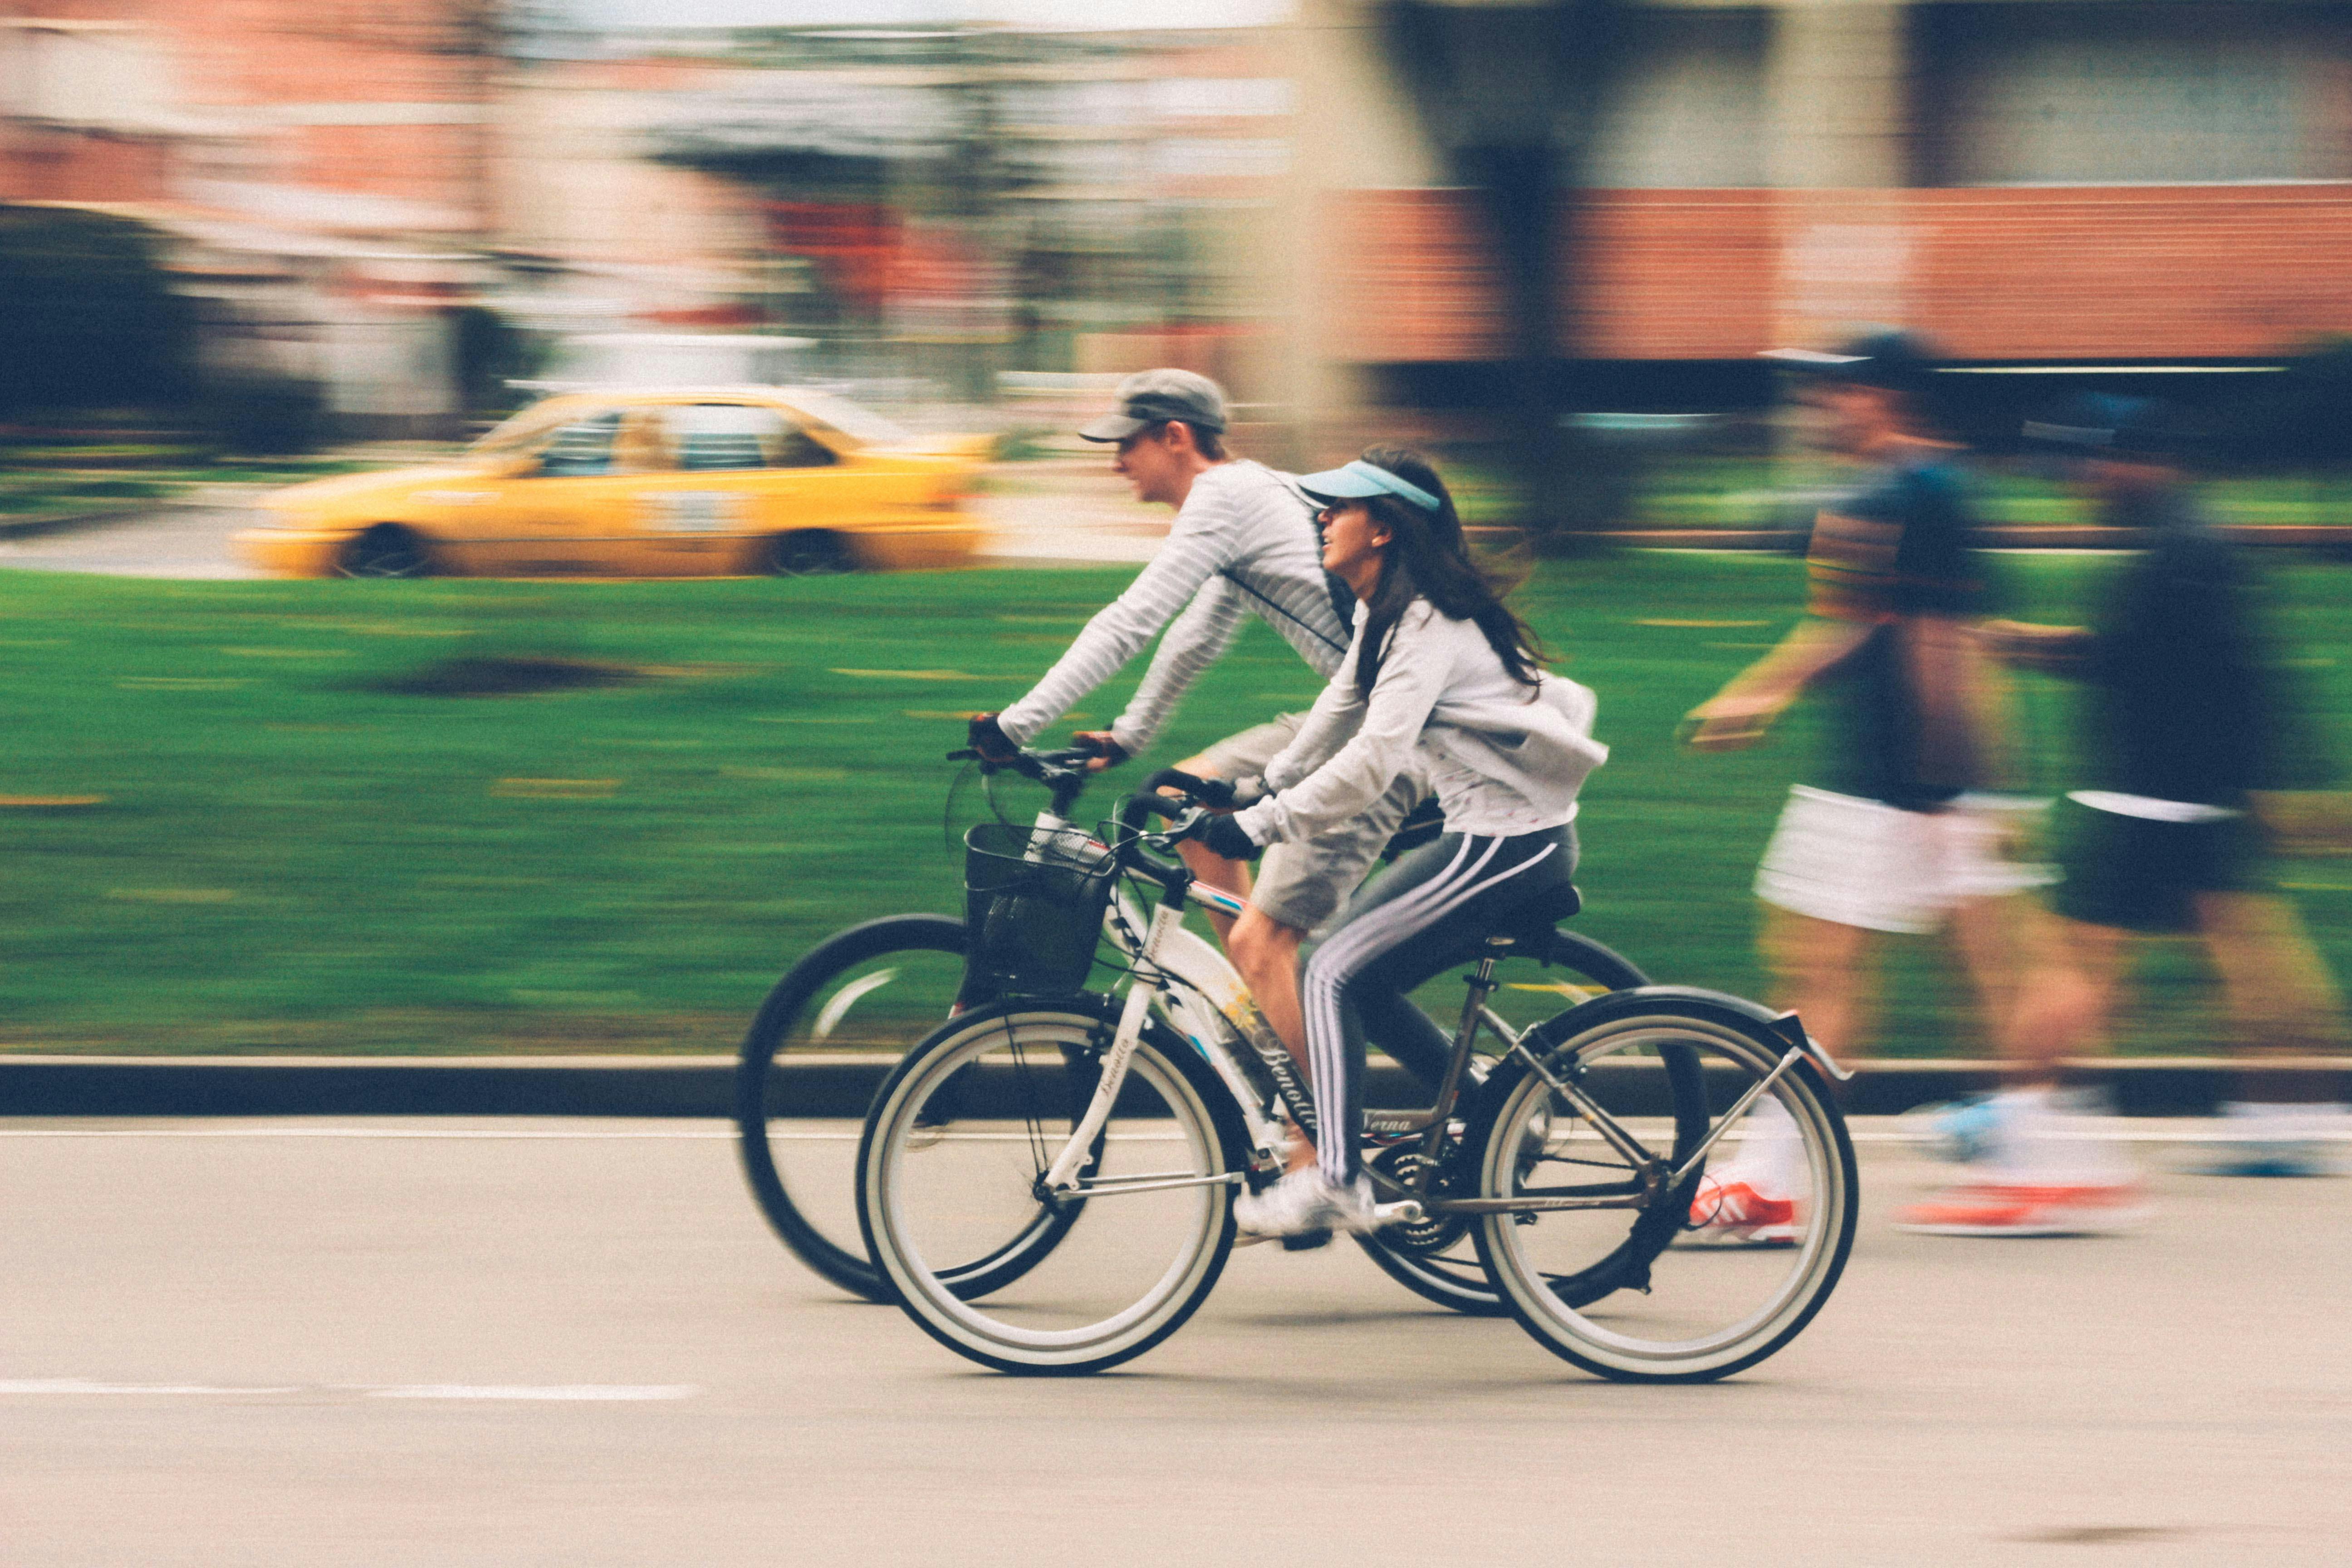 A man and a woman riding bikes